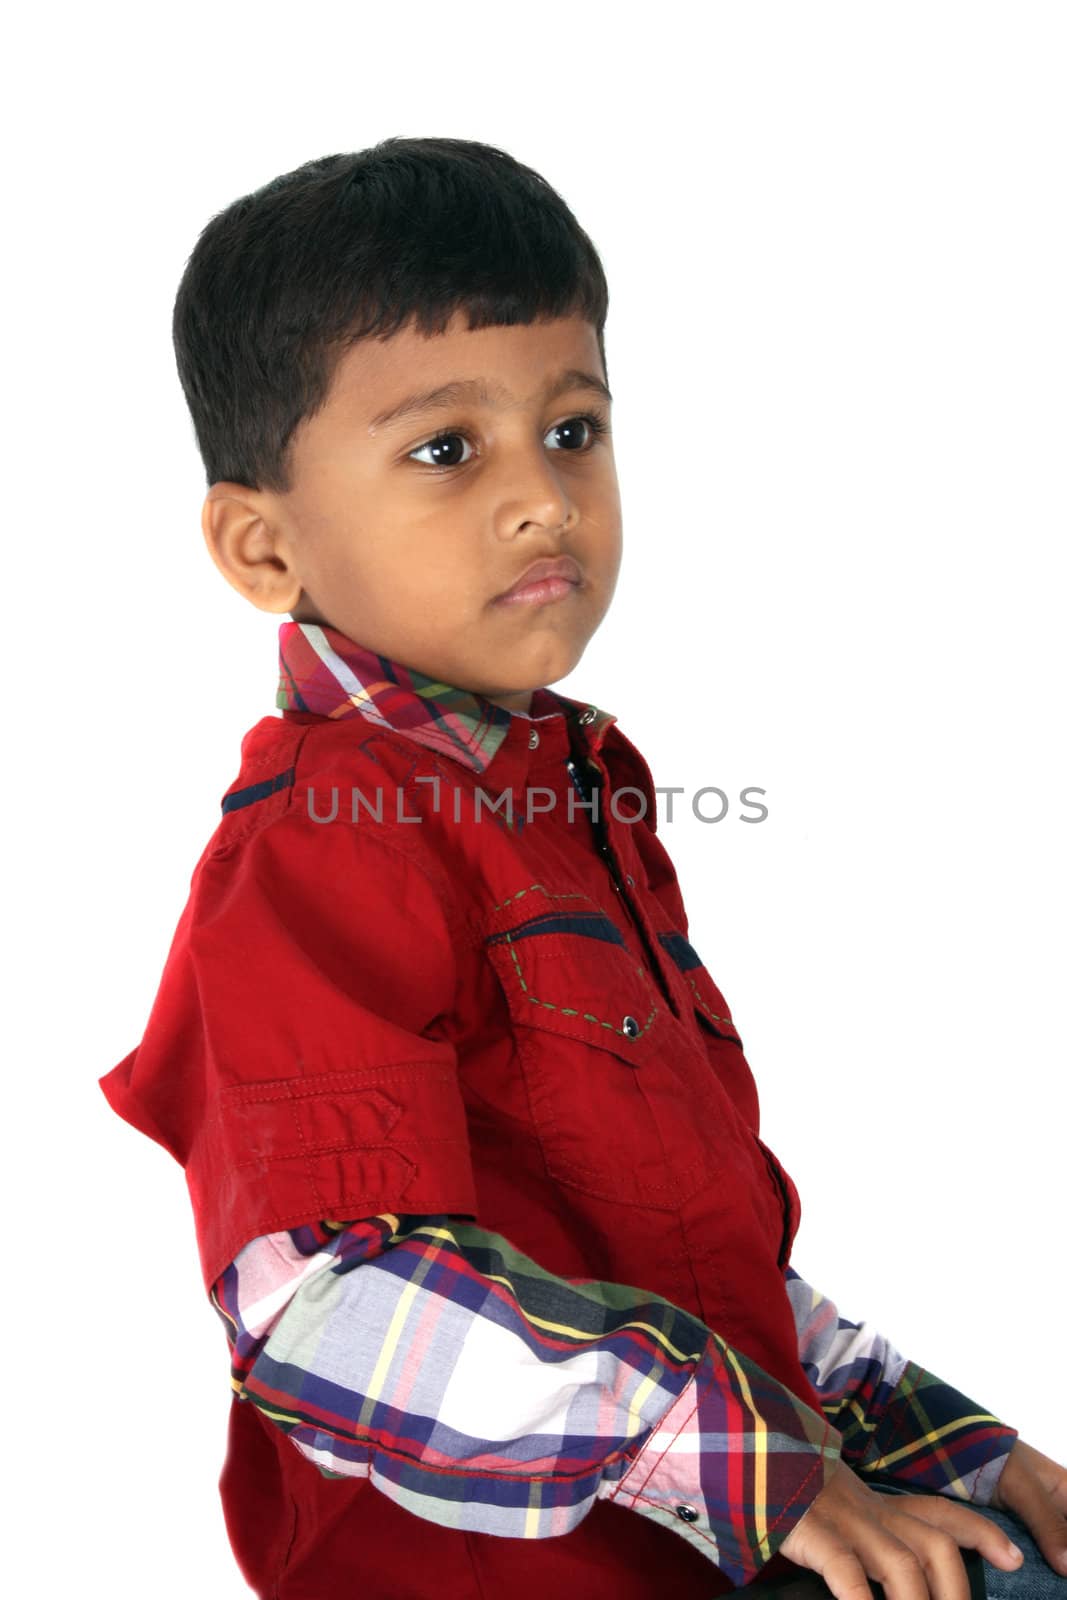 A portrait of an Indian boy in a unhappy mood, on white studio background.